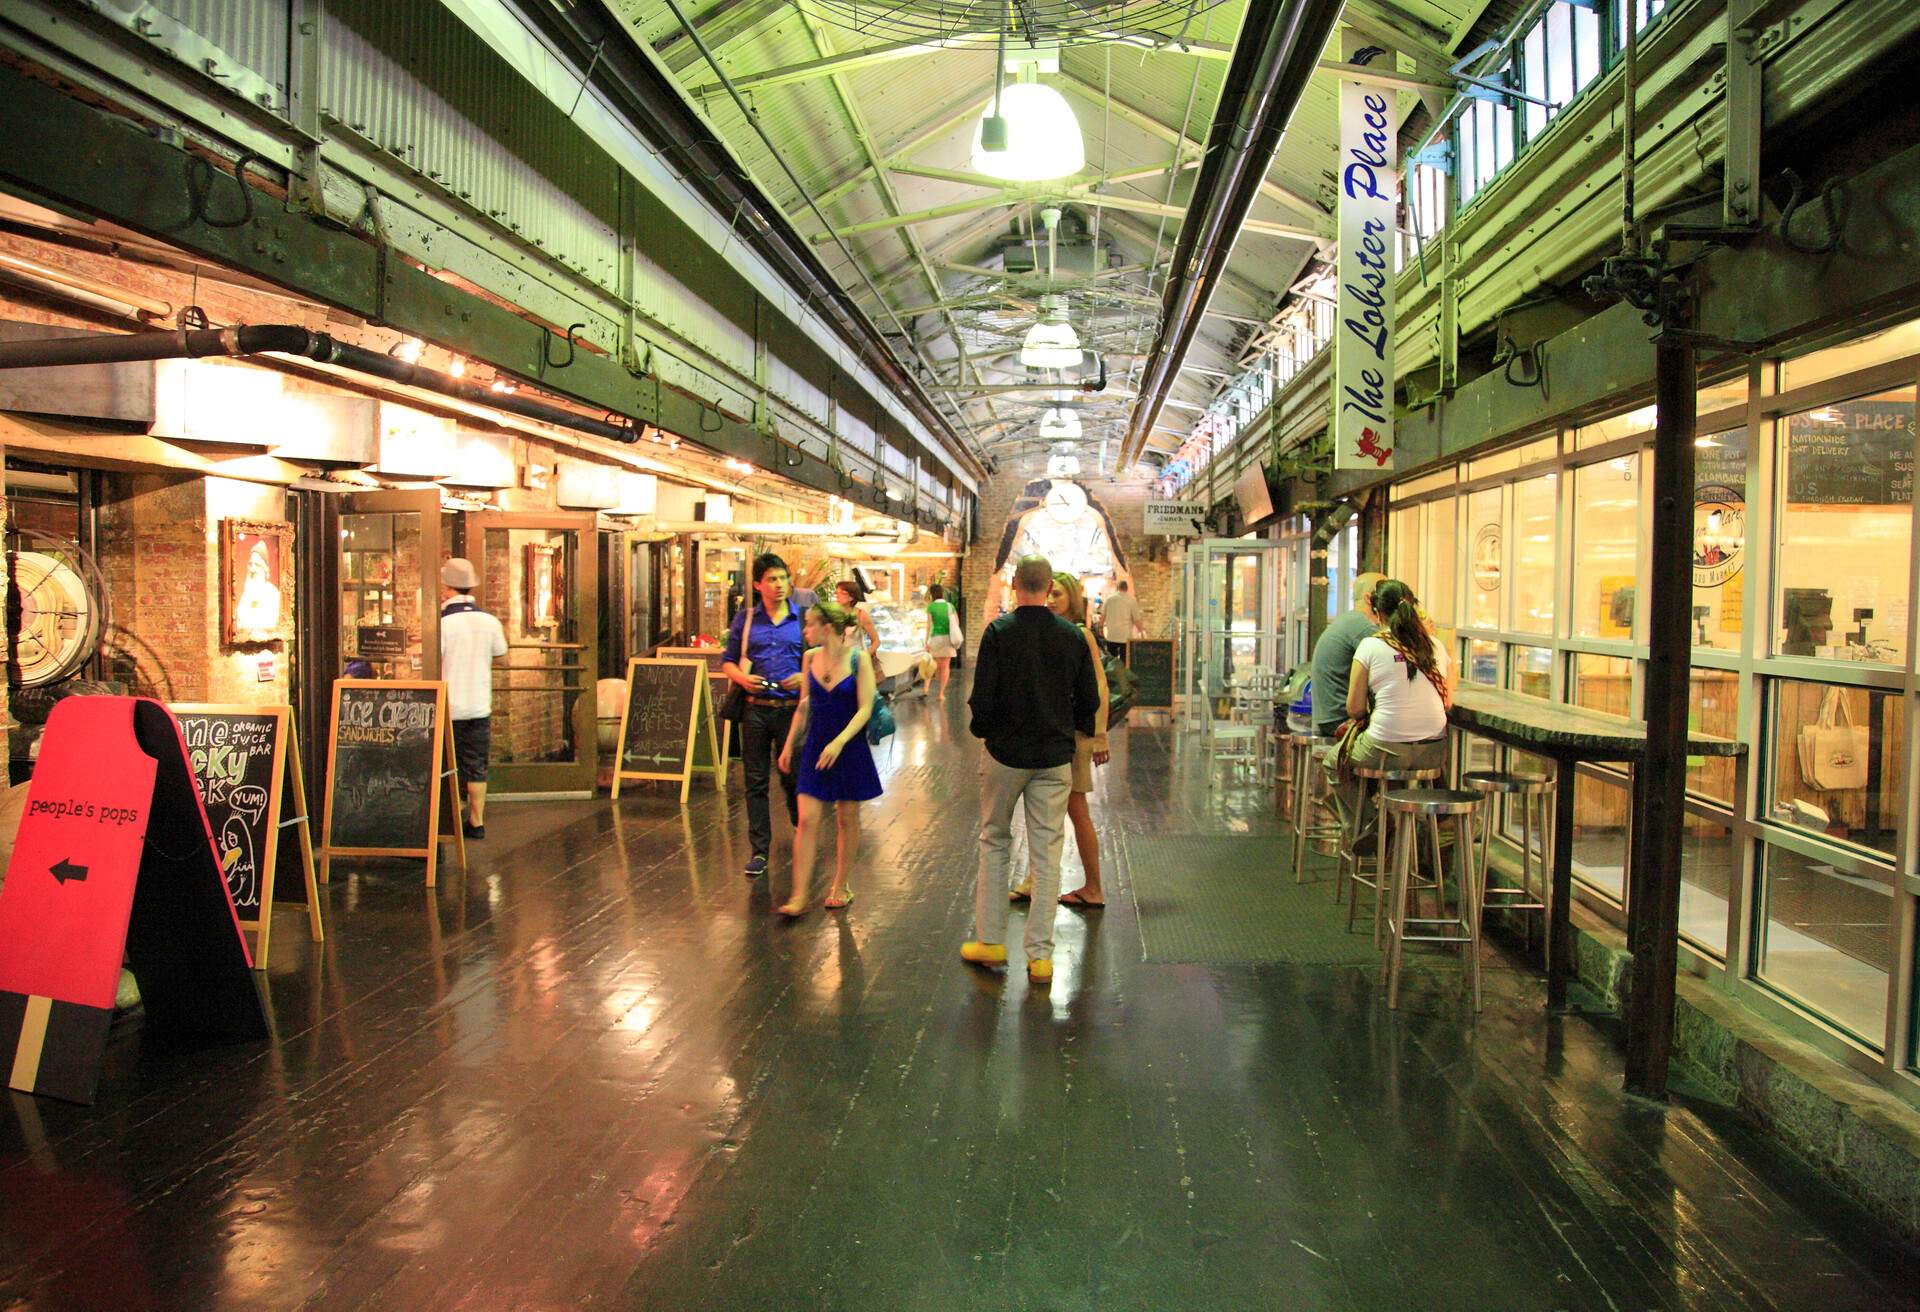 DEST_USA_NEW YORK_NEW YORK CITY_CHELSEA MARKET_GettyImages-117986241